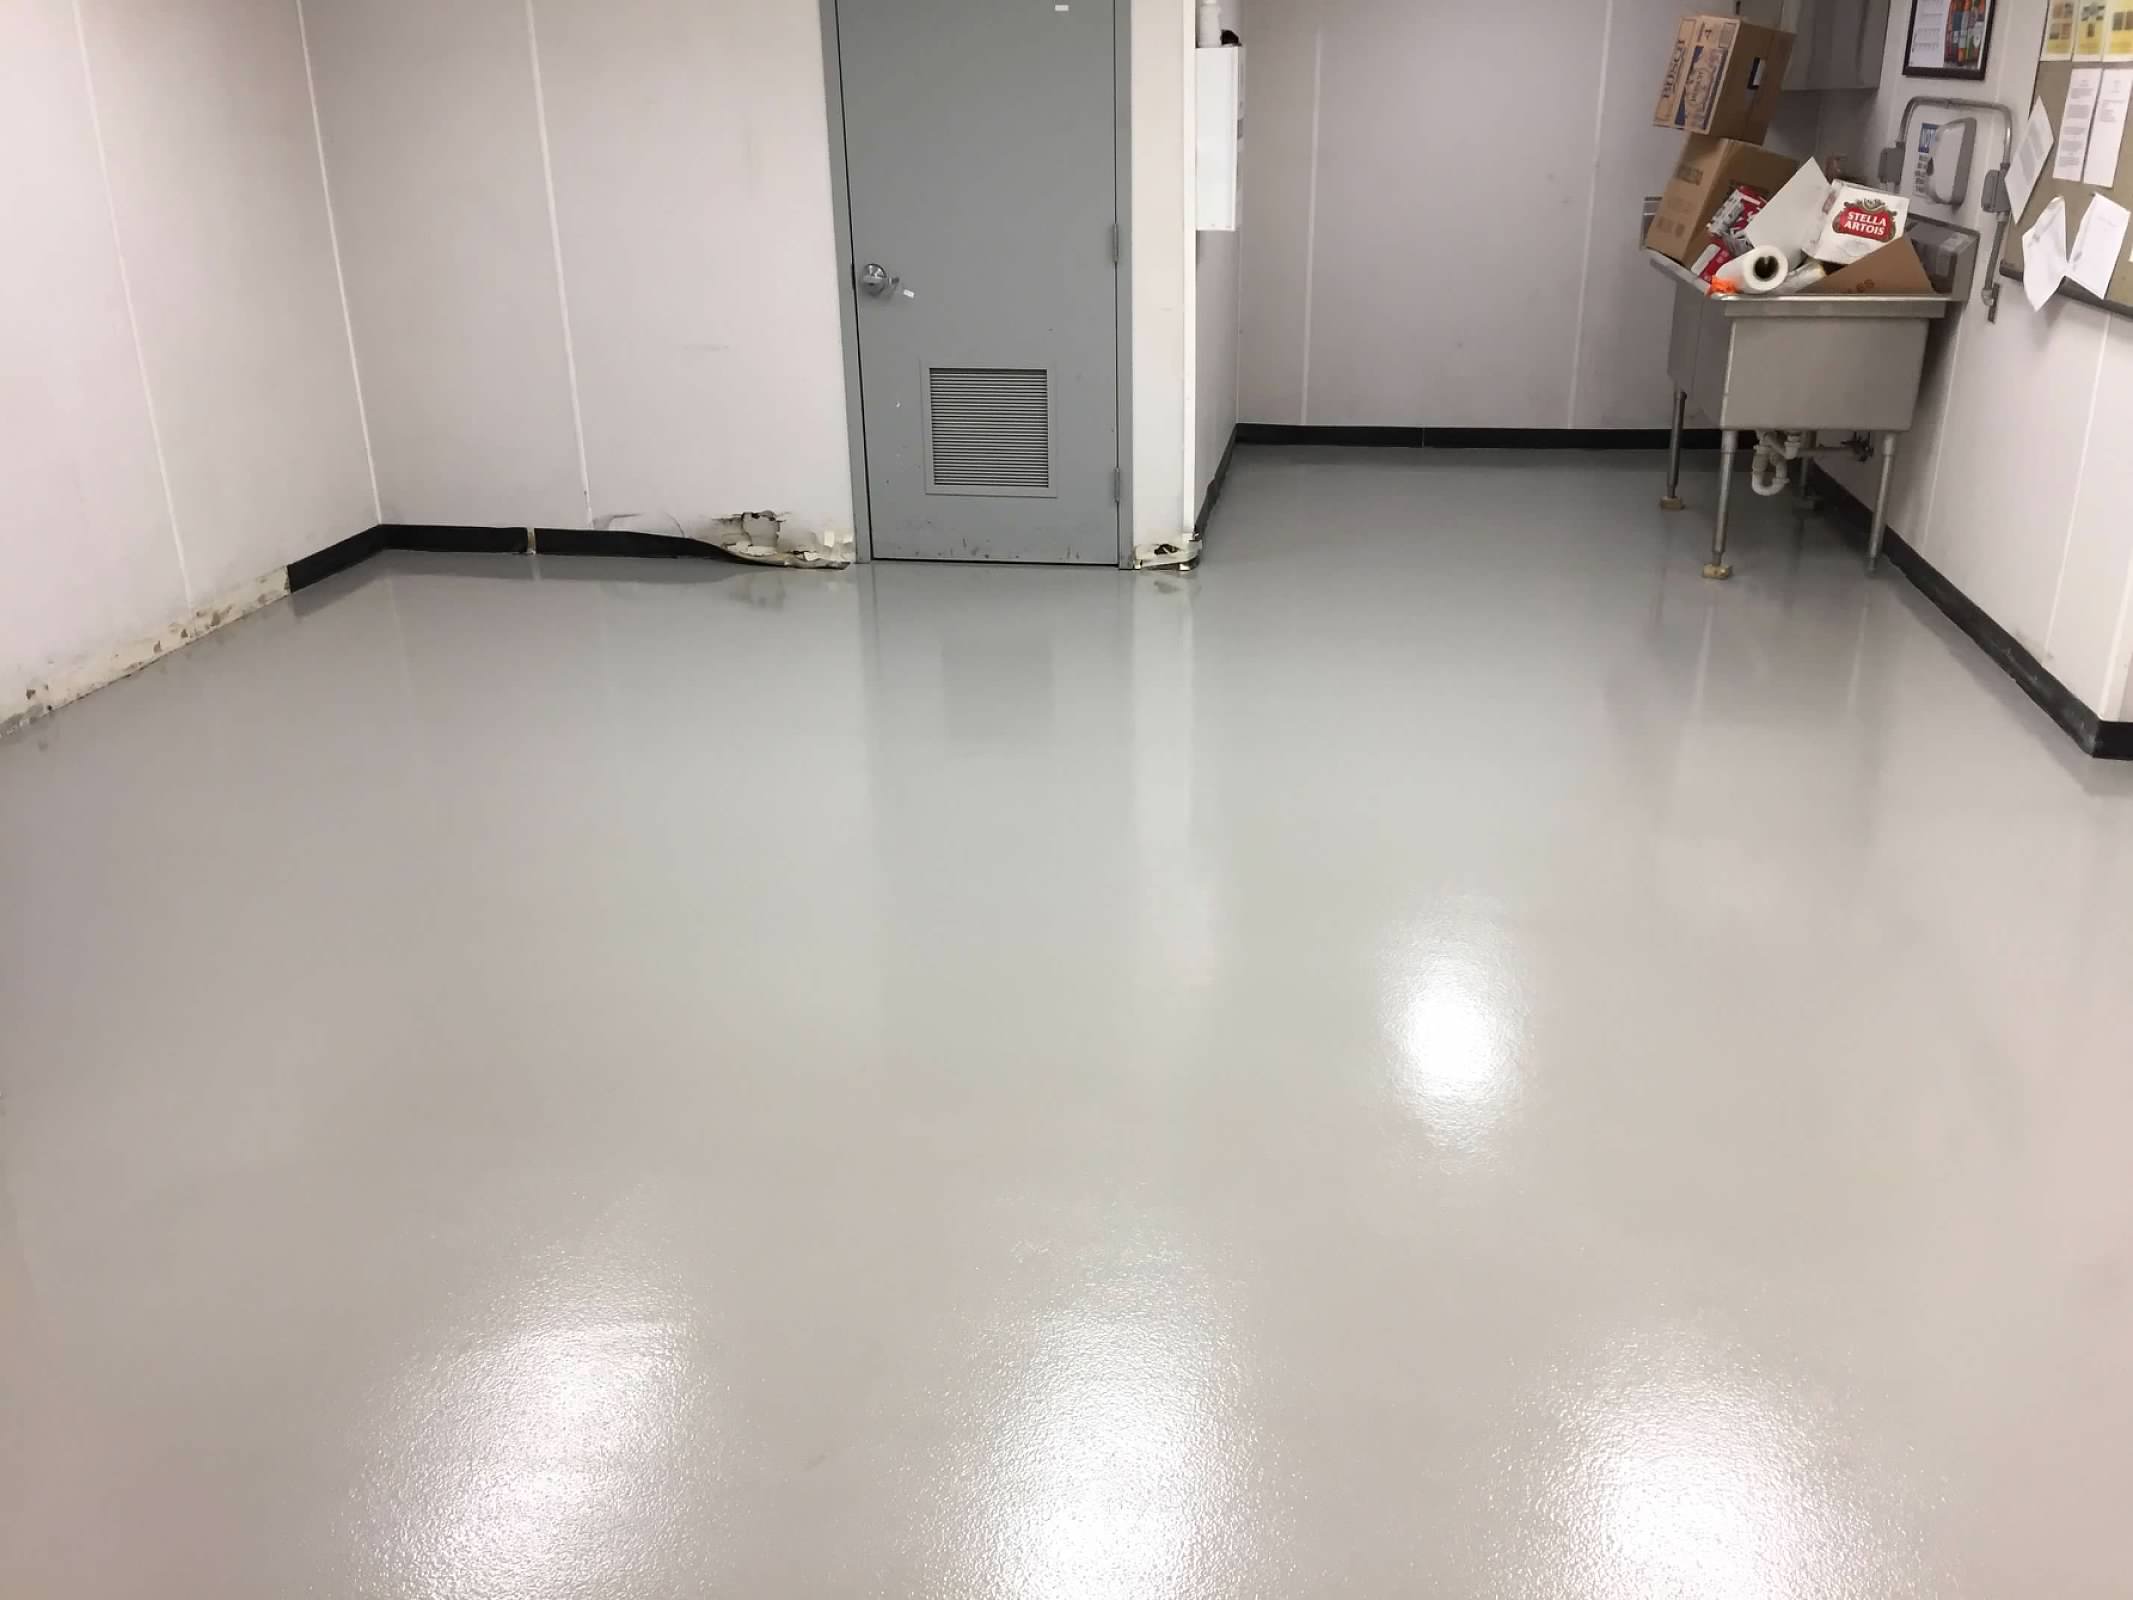 Coated floor with a sink in the background